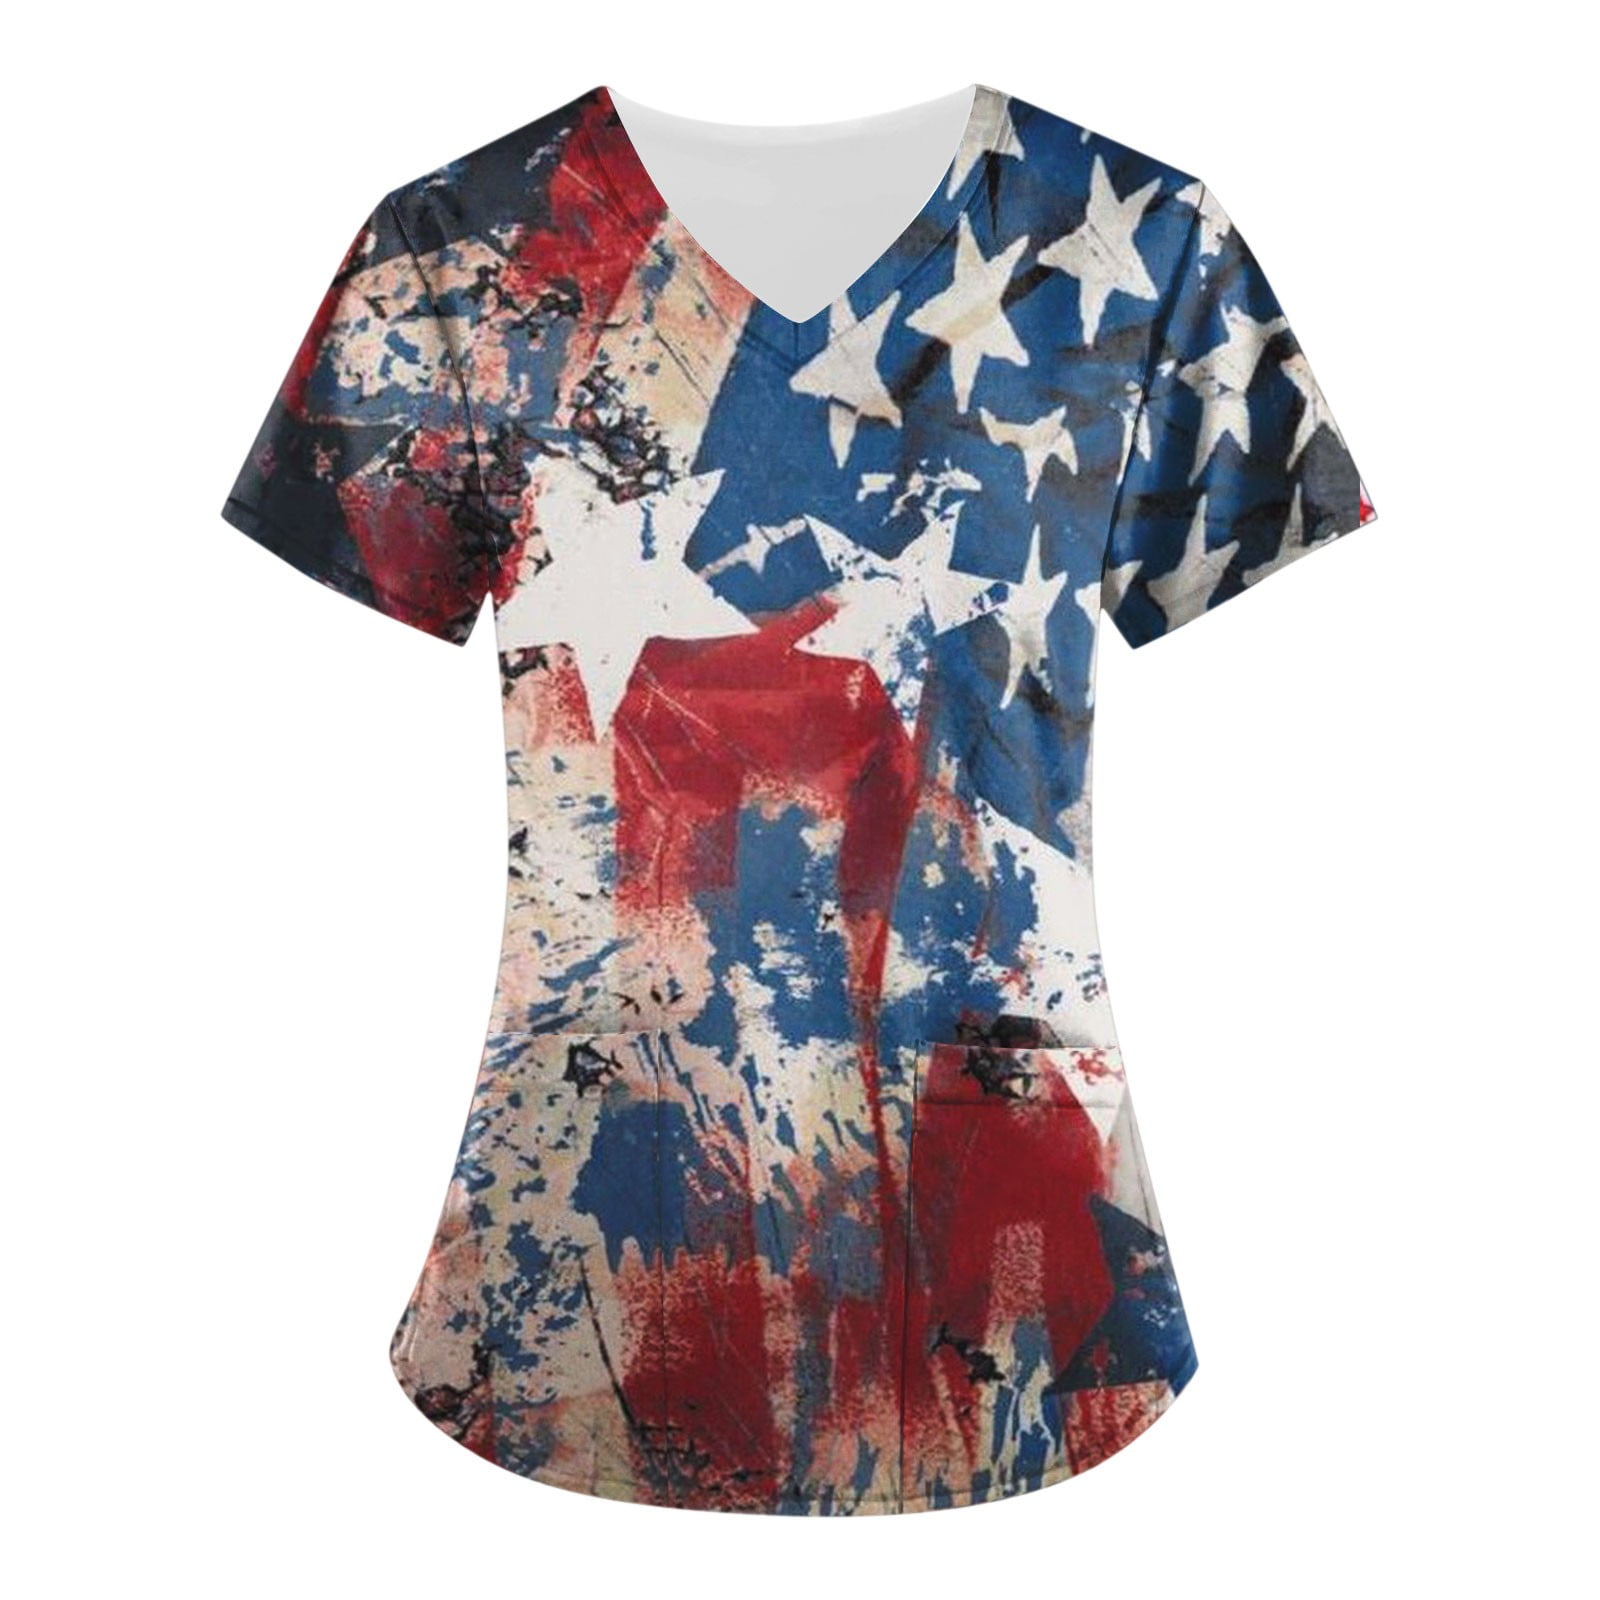 TQWQT Nursing for Women Loose Stretchy Printed Plus Size Working Uniform Blouse Summer Short Sleeve Independence Cute Tees,Dark Blue L - Walmart.com